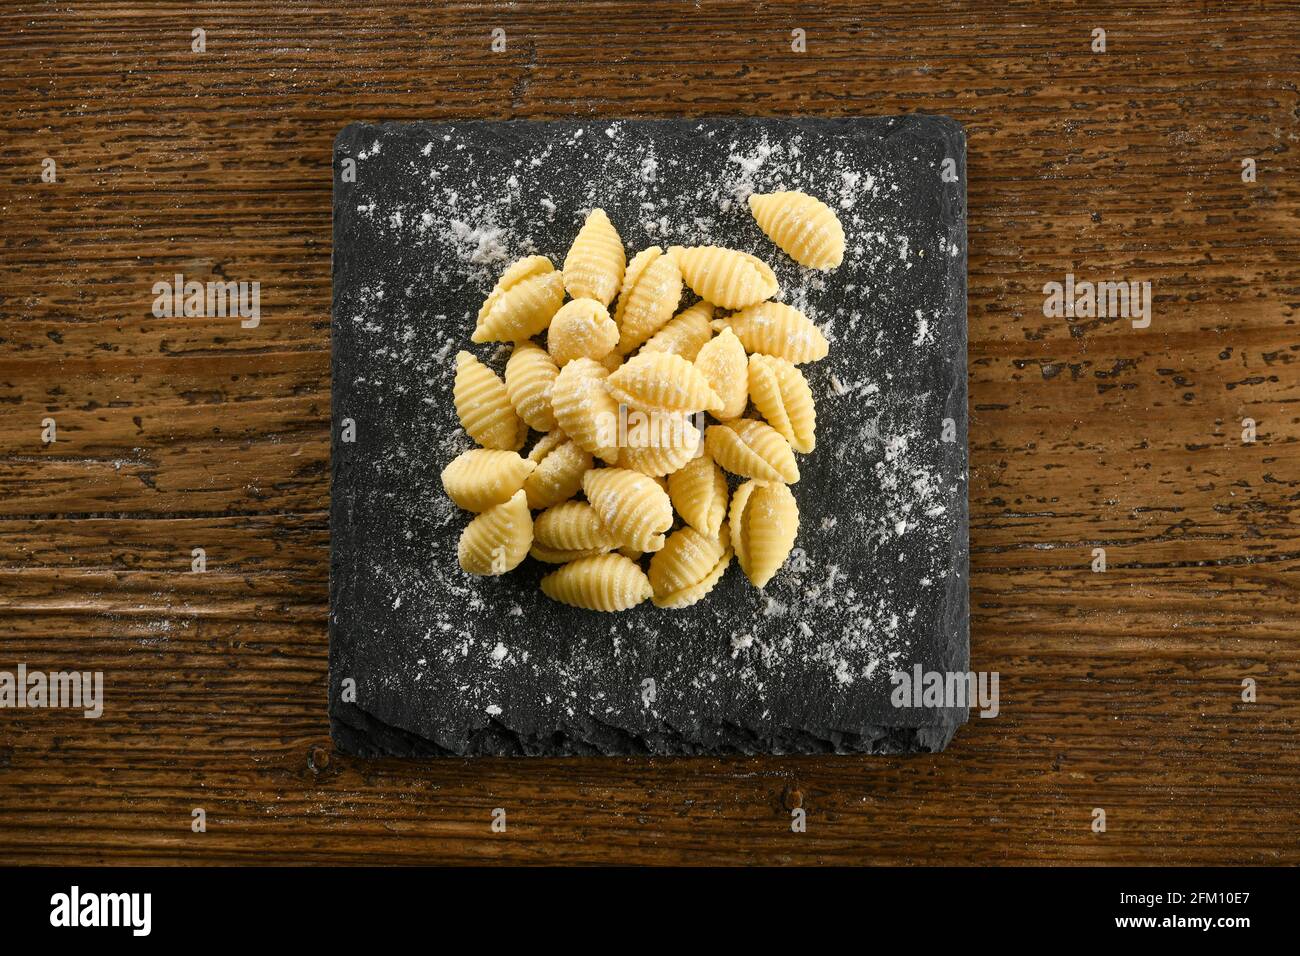 Top view of pile of uncooked gnocchetti sardi pasta with flour placed on board on wooden table Stock Photo